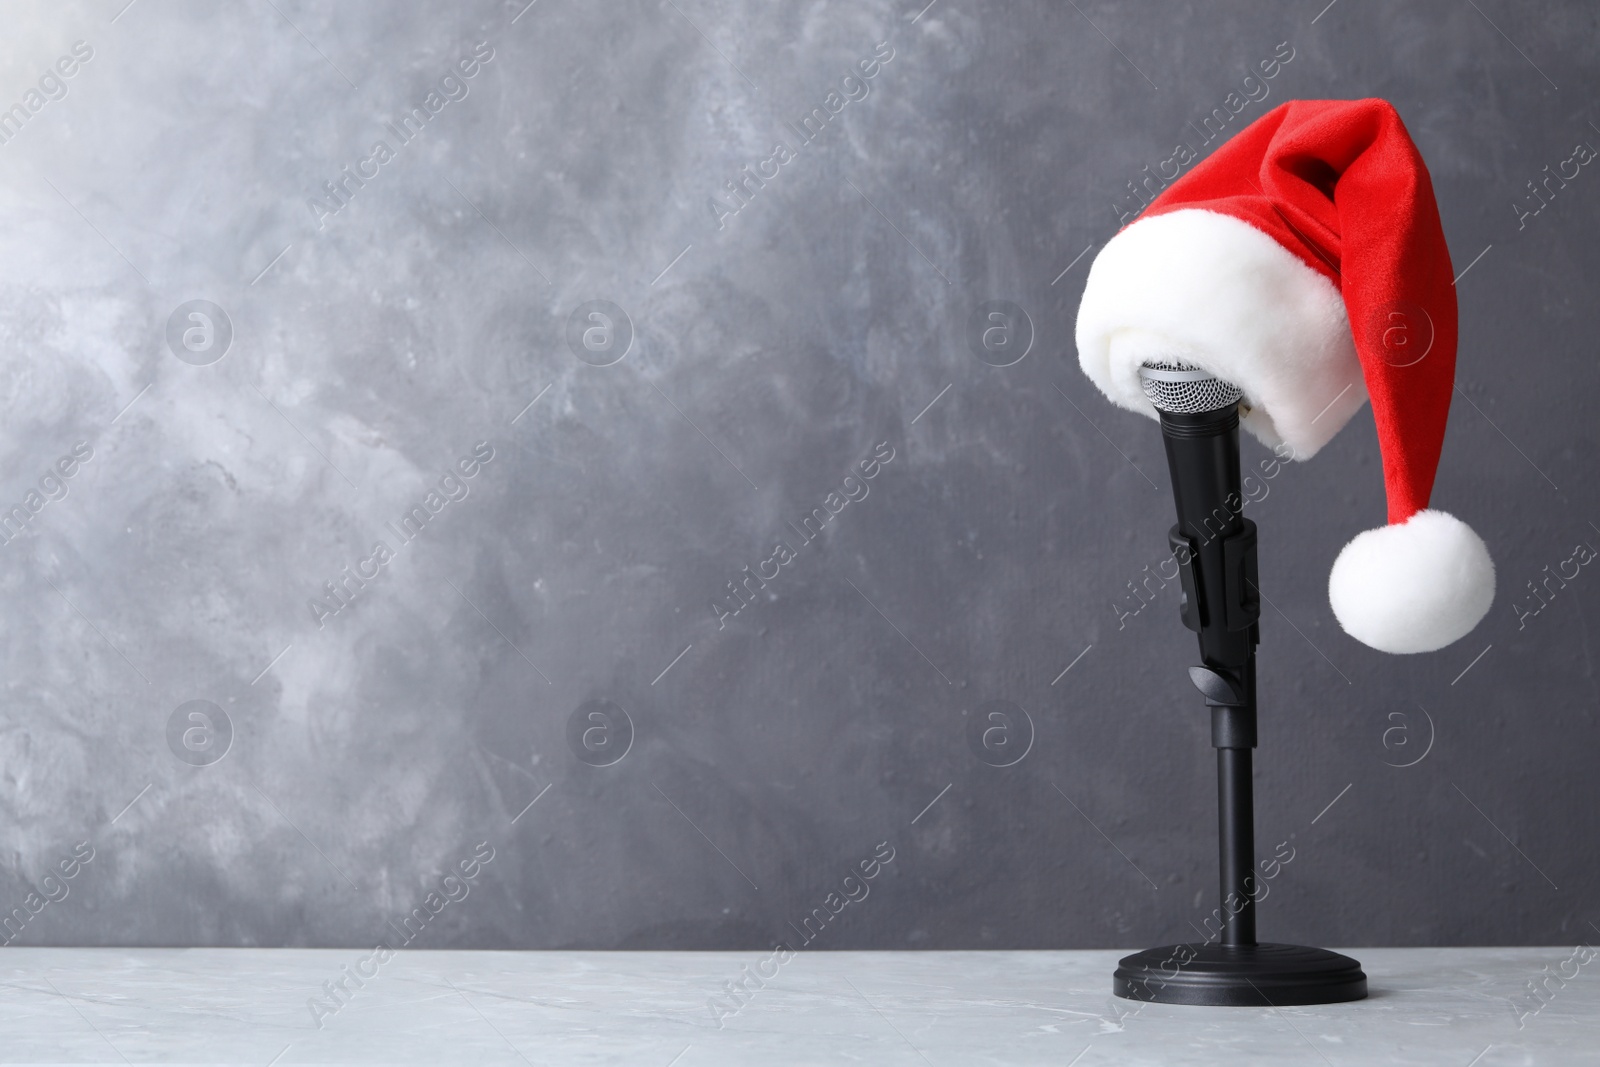 Photo of Microphone with Santa hat on table against grey background, space for text. Christmas music